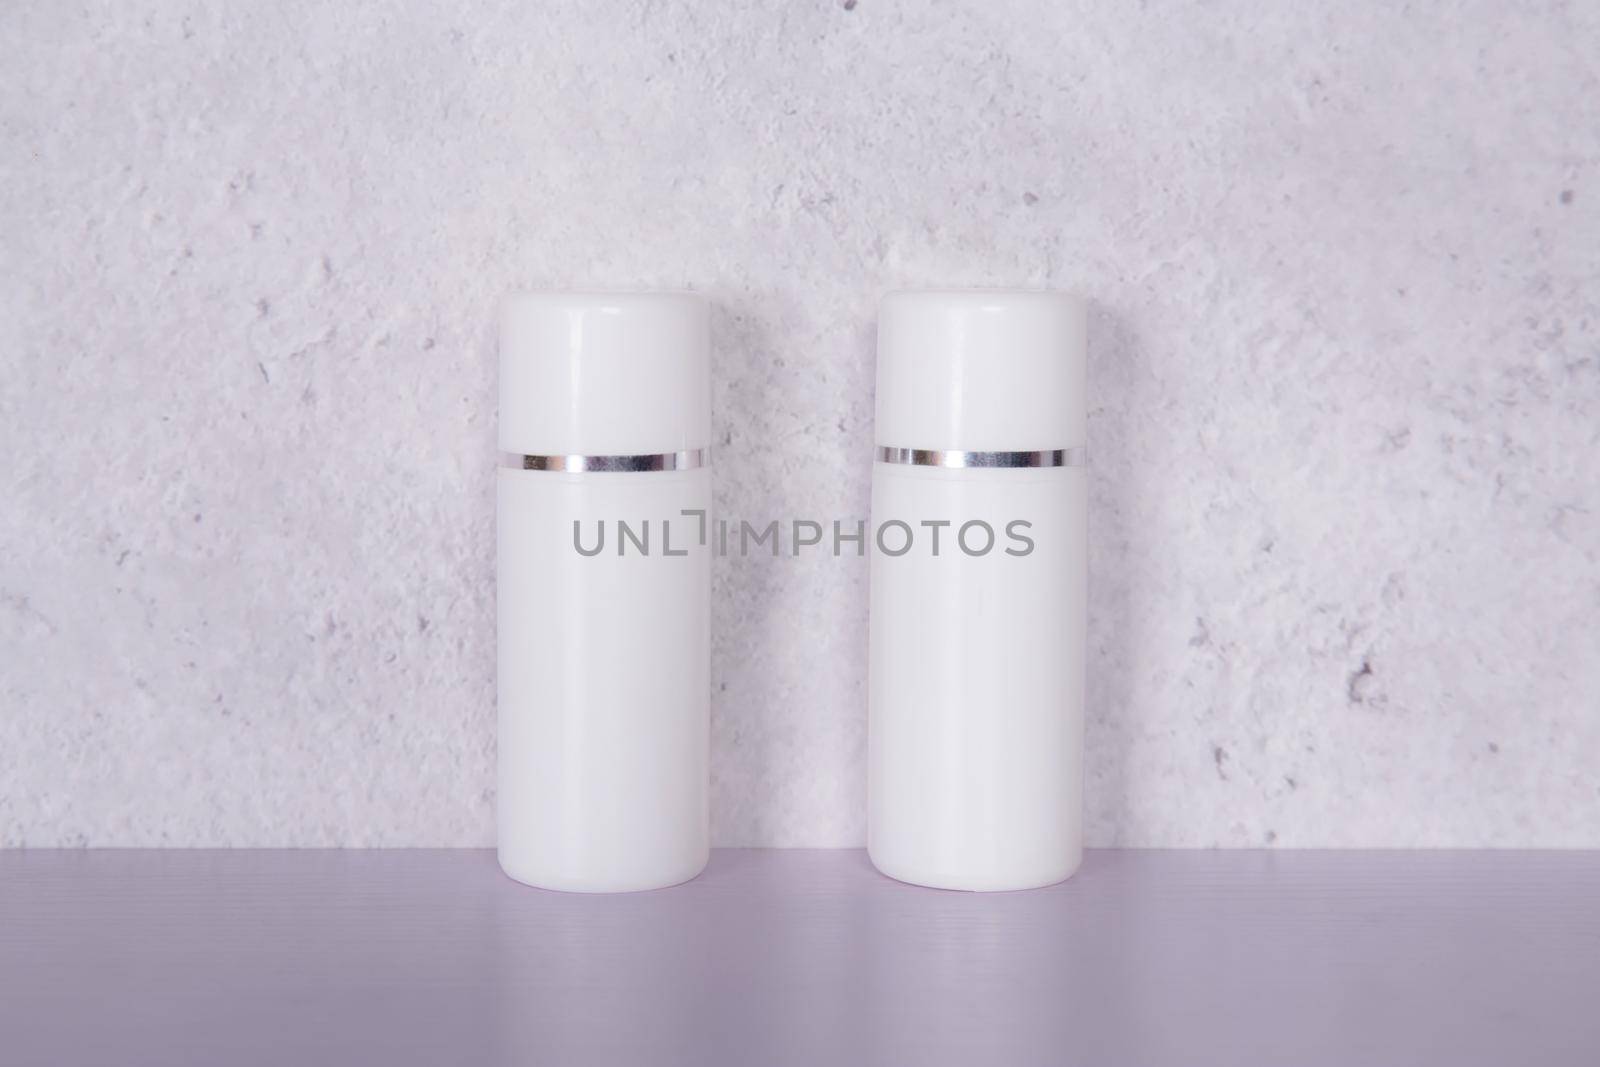 Mockup cosmetic bottle with cream or lotion on desk, mock up package for advertising, skincare or cosmetology, skin care and treatment with product.